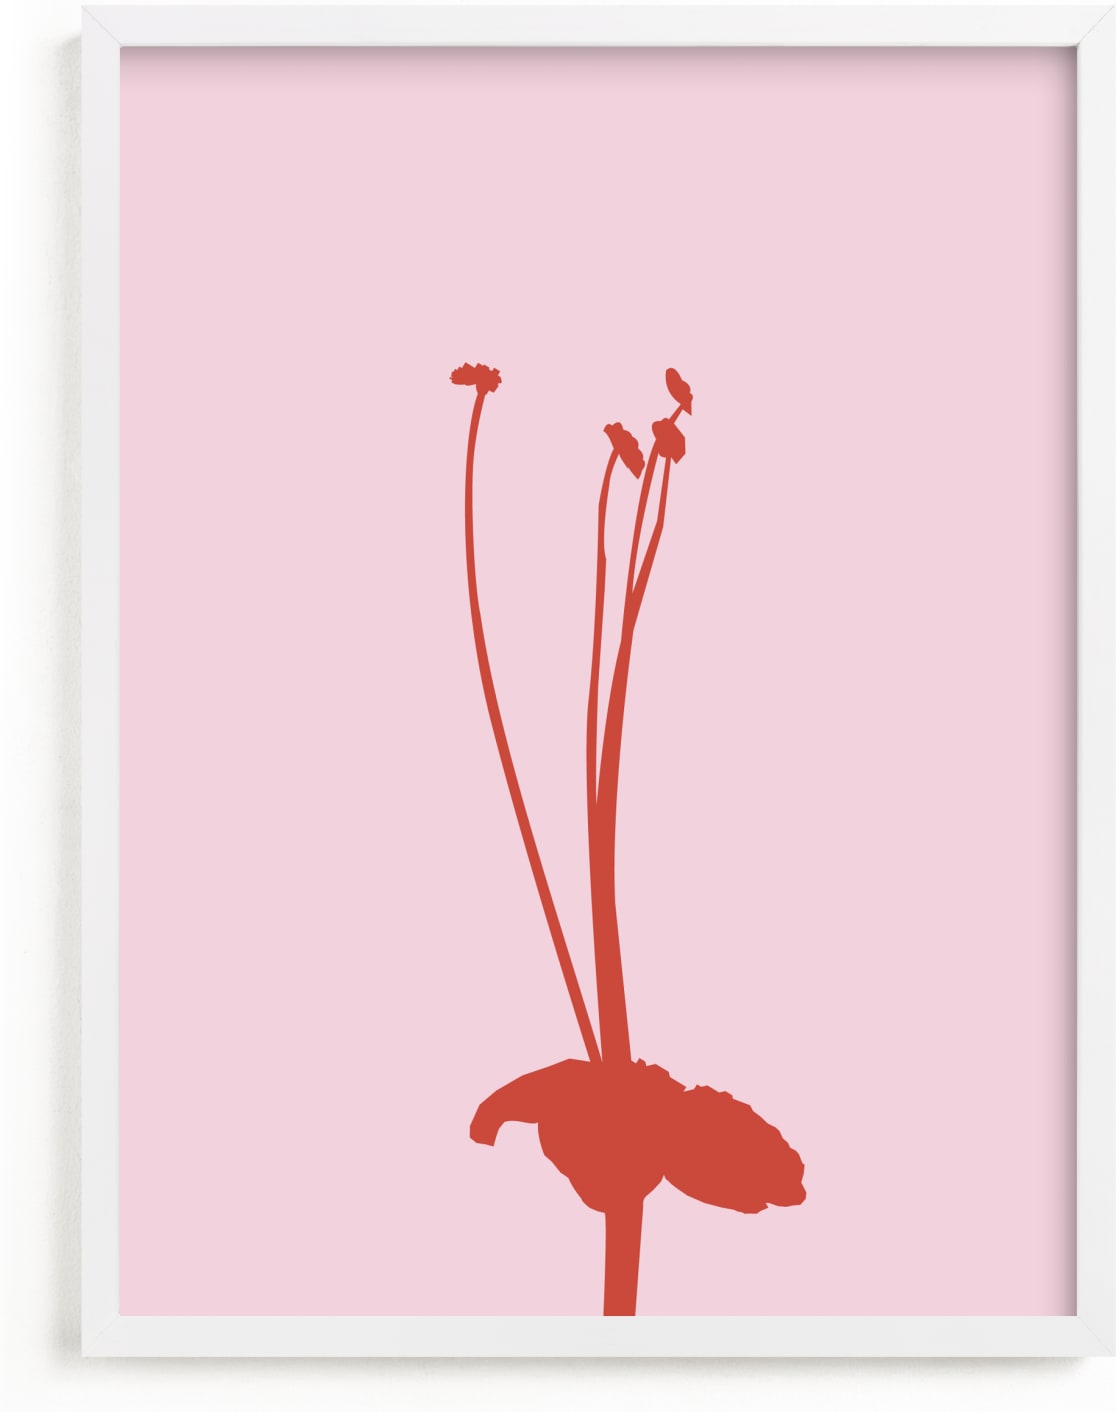 This is a pink art by letterfix called Flower II.